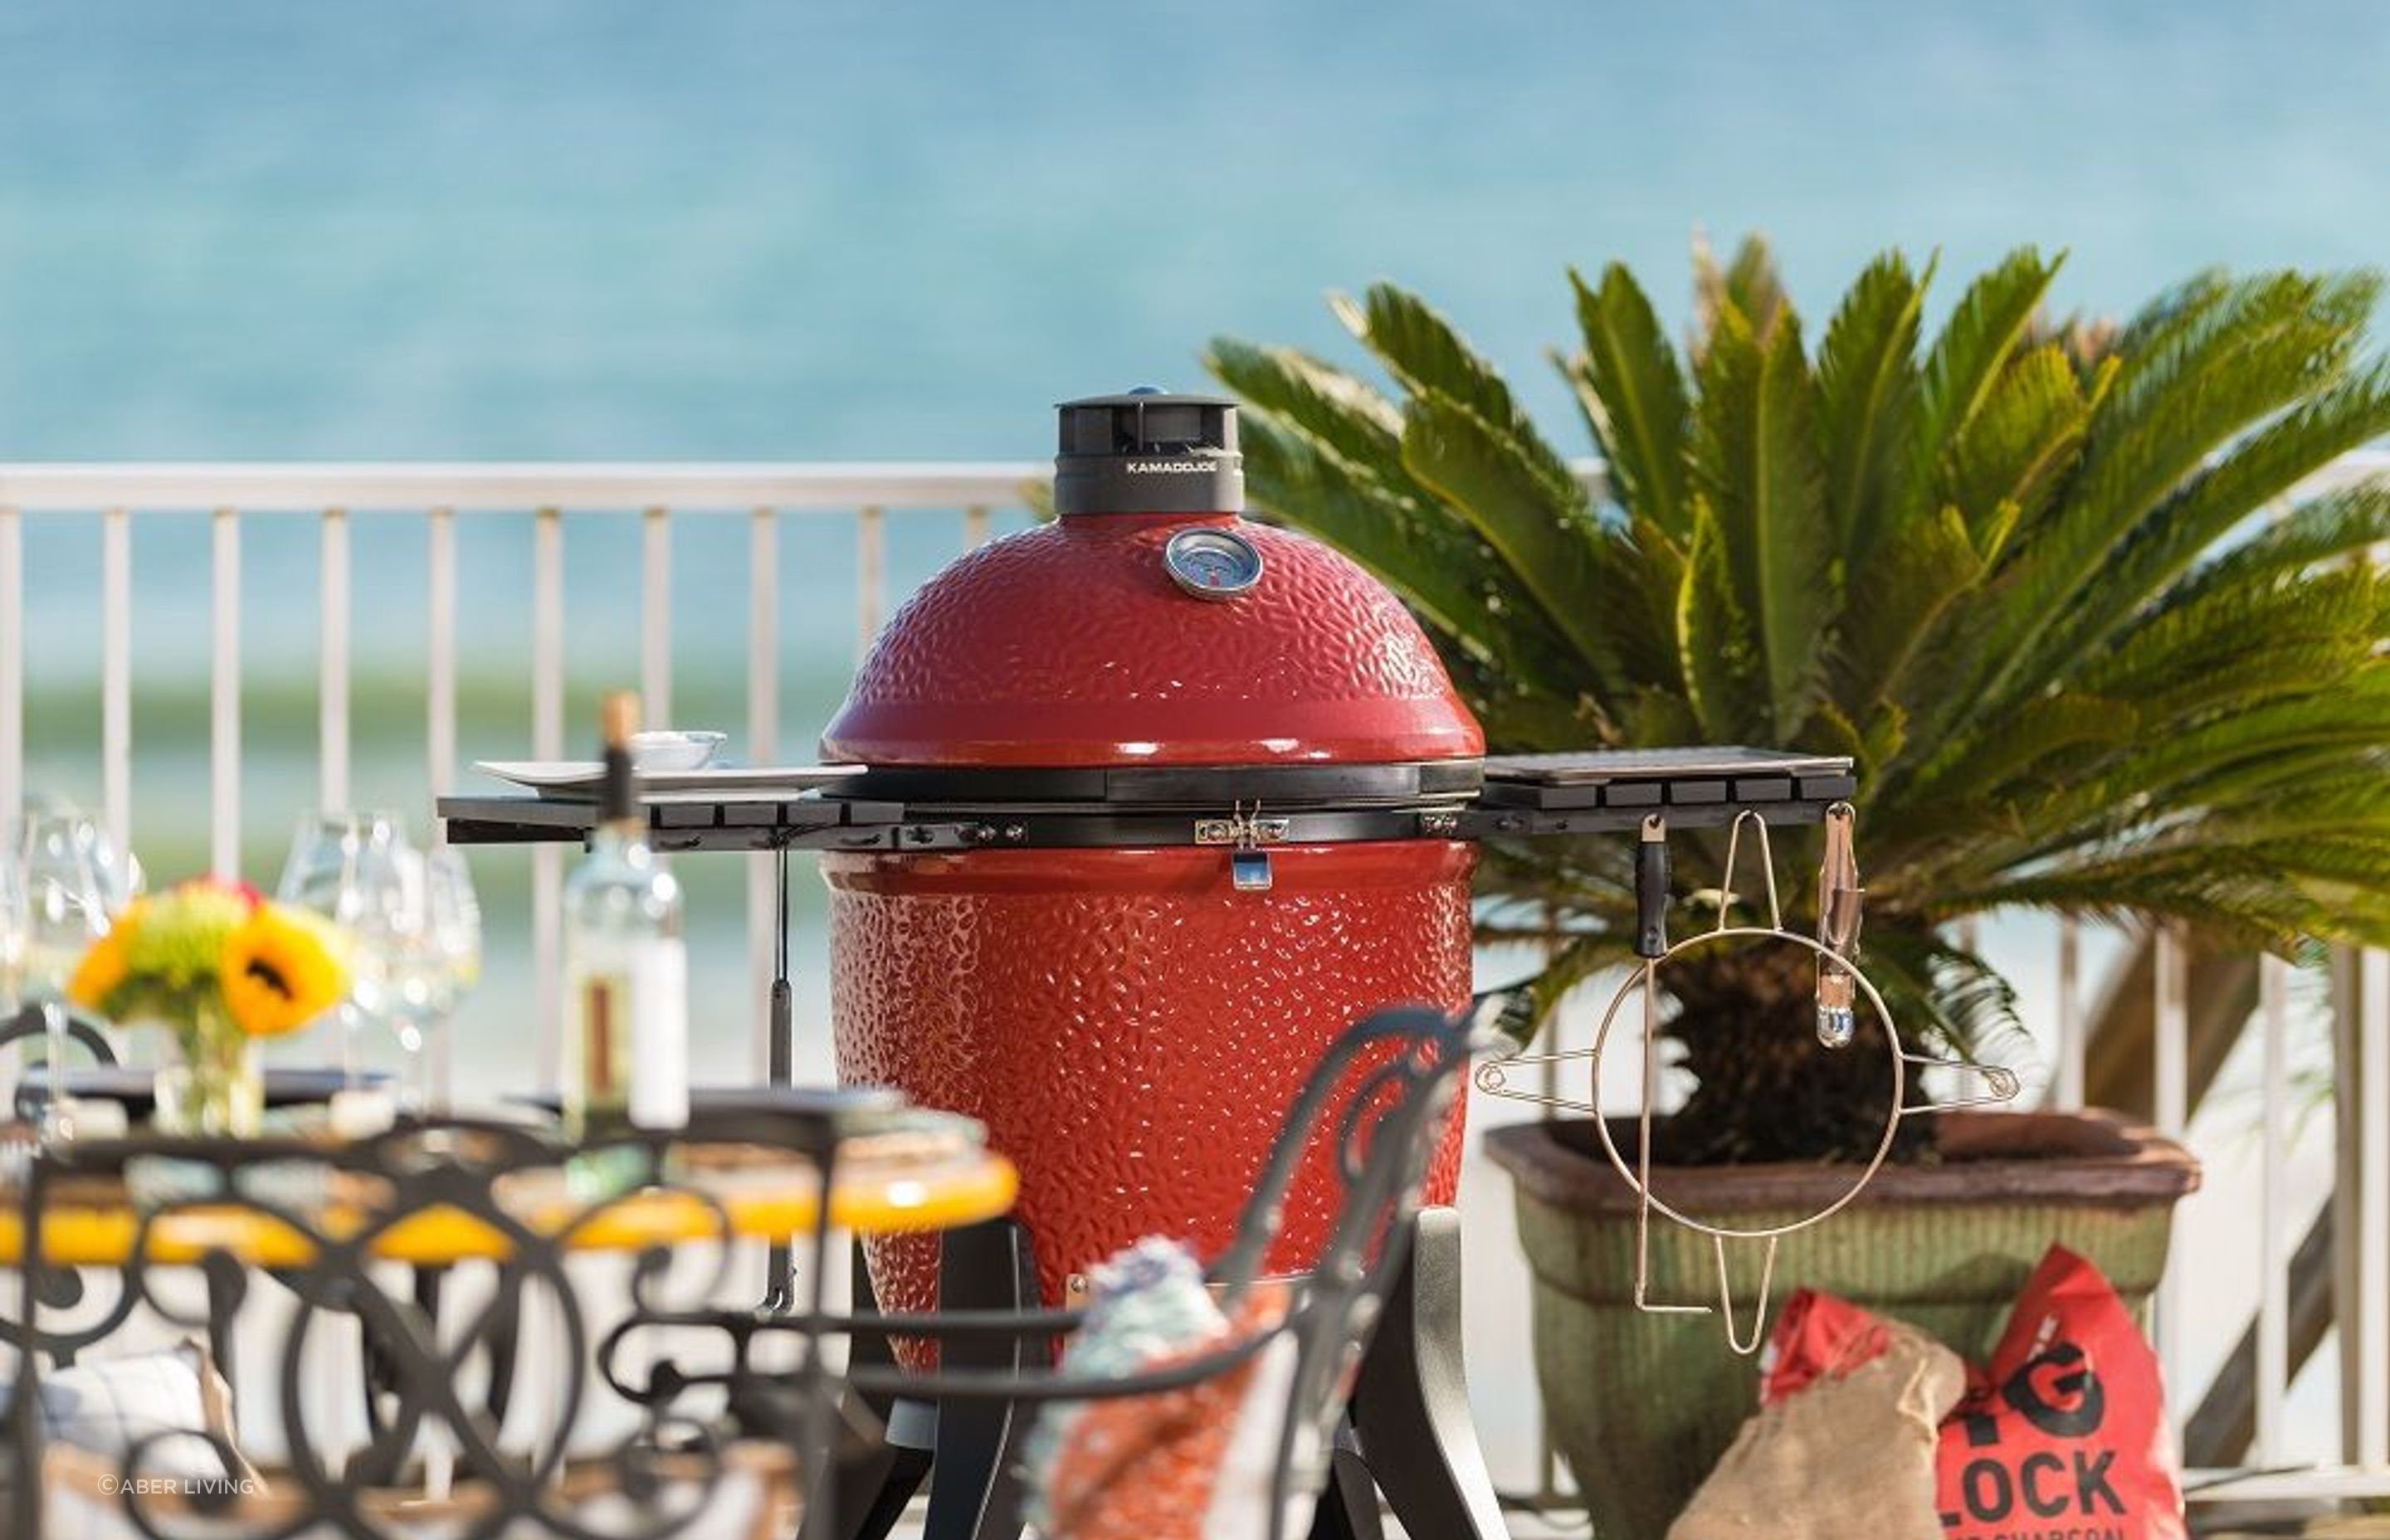 The ceramic construction of the Kamado Joe Classic III 18 Inch Ceramic Grill allows for even cooking of food.